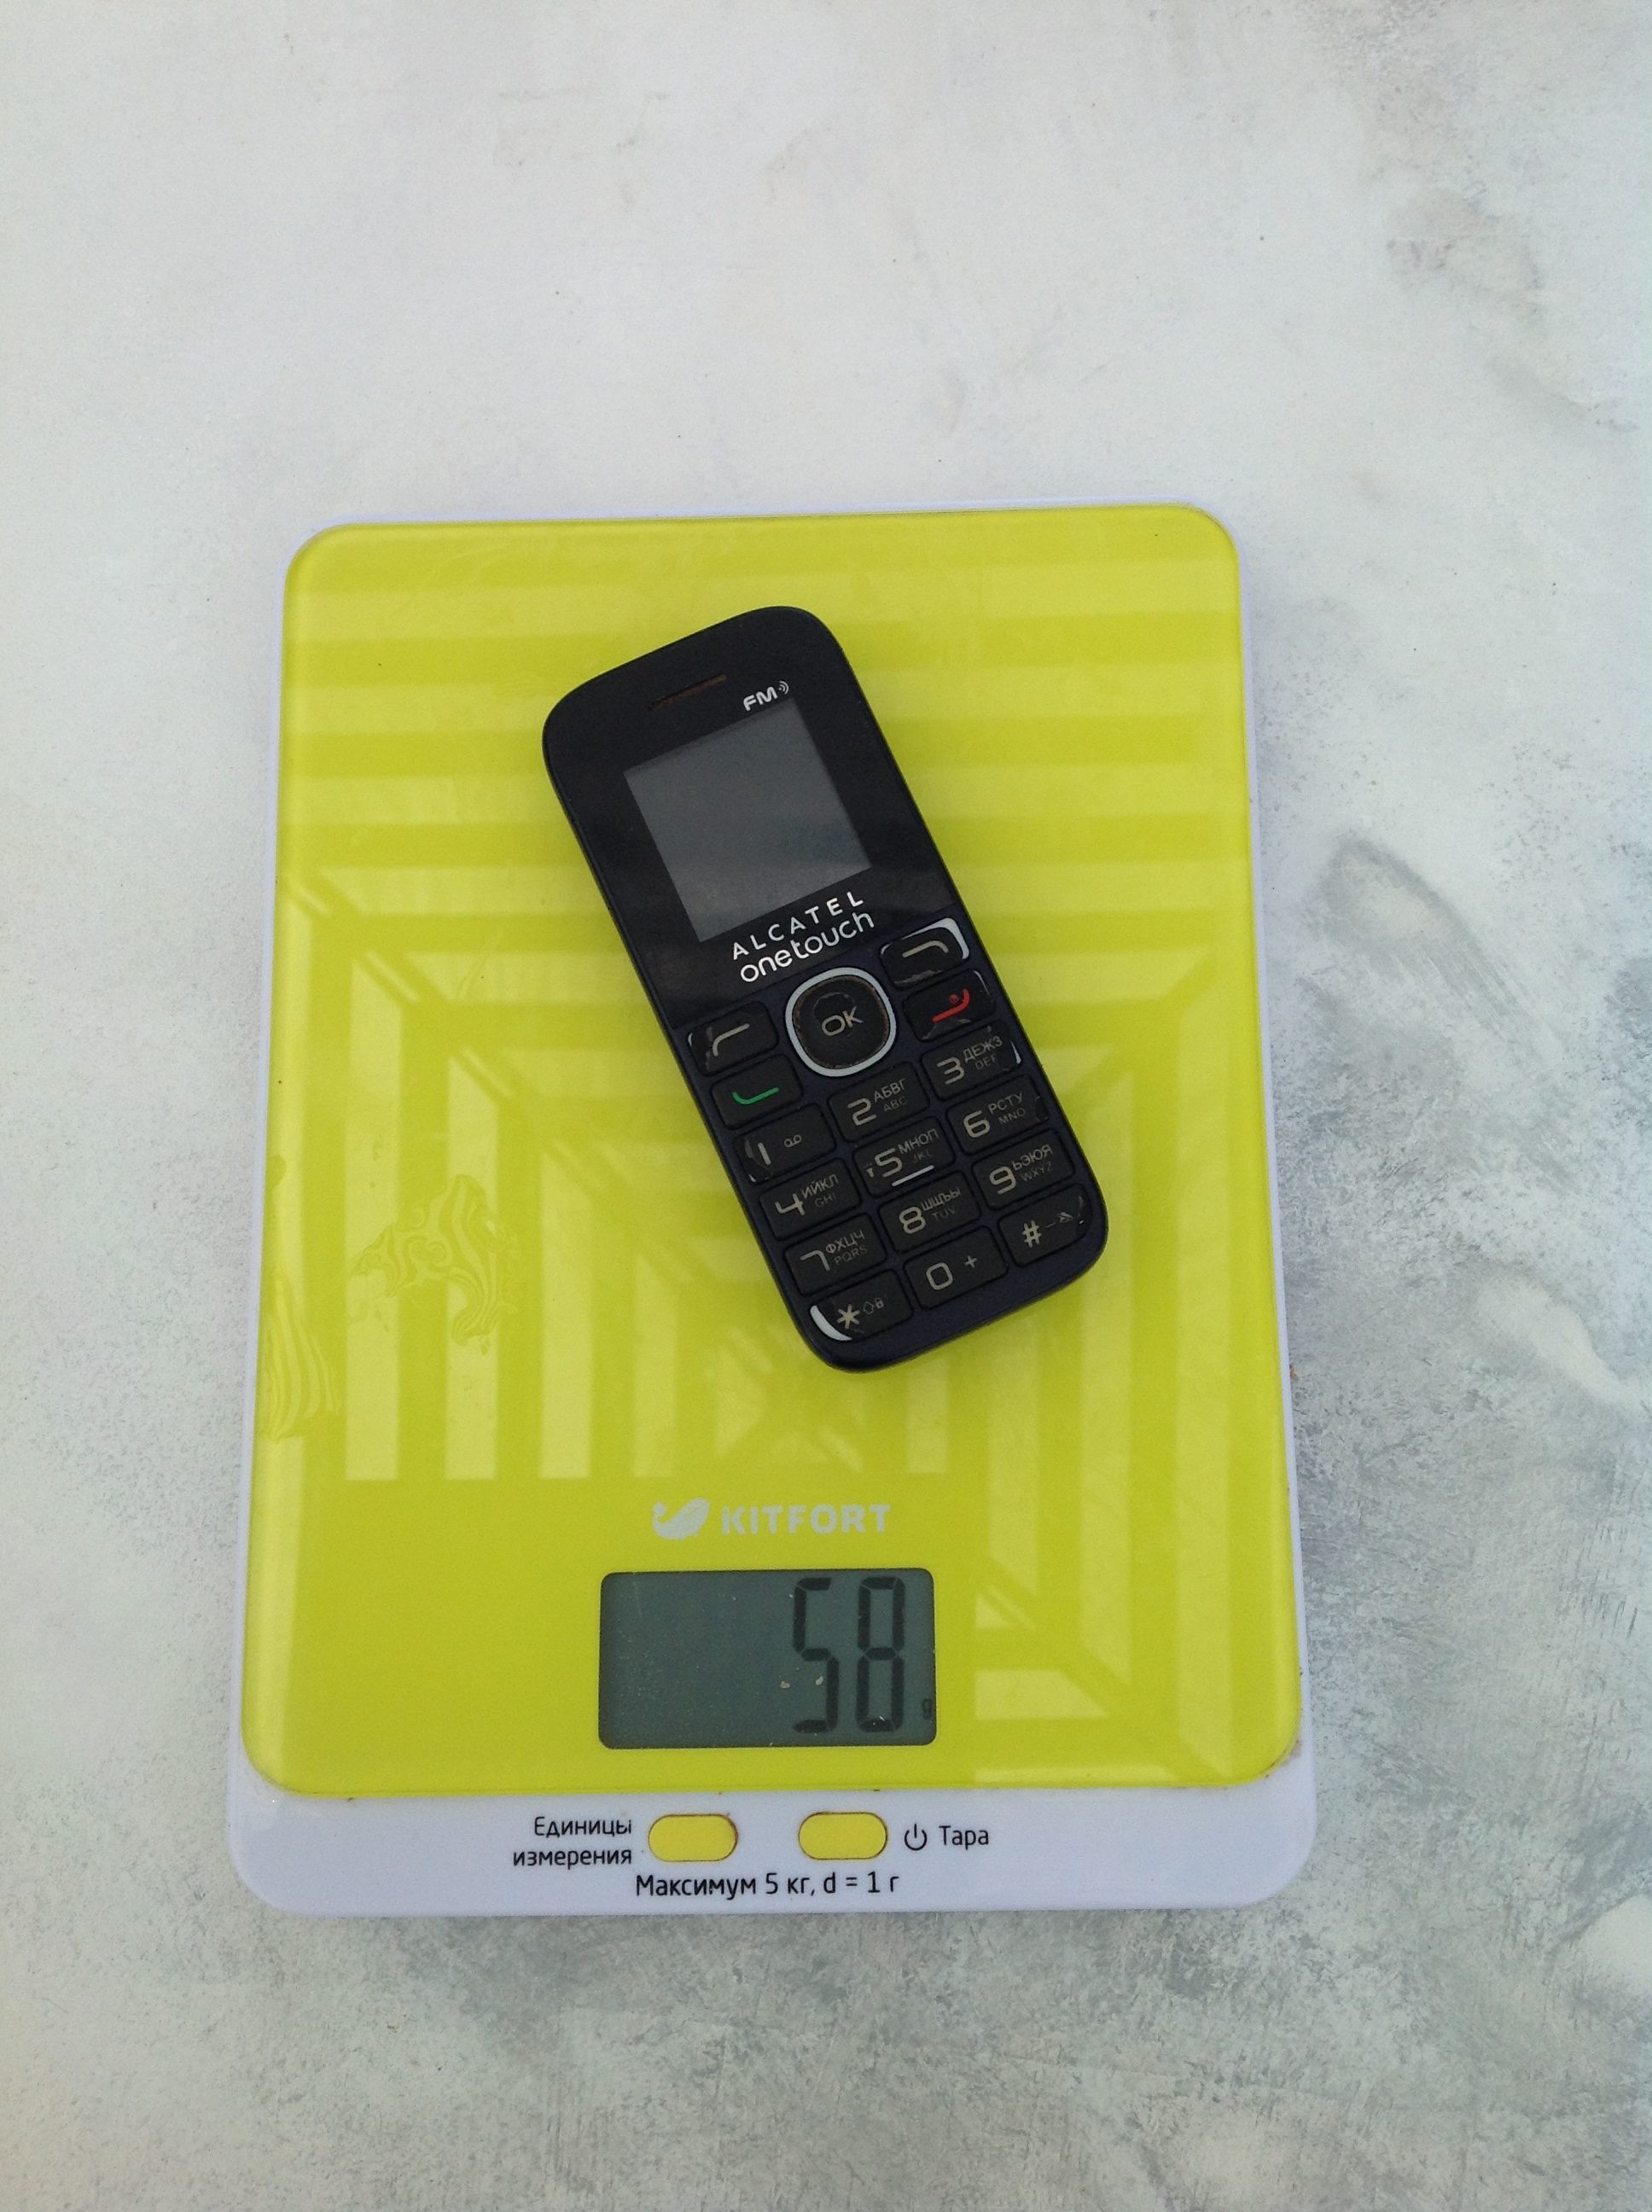 weight of the alcatel one touch push-button phone